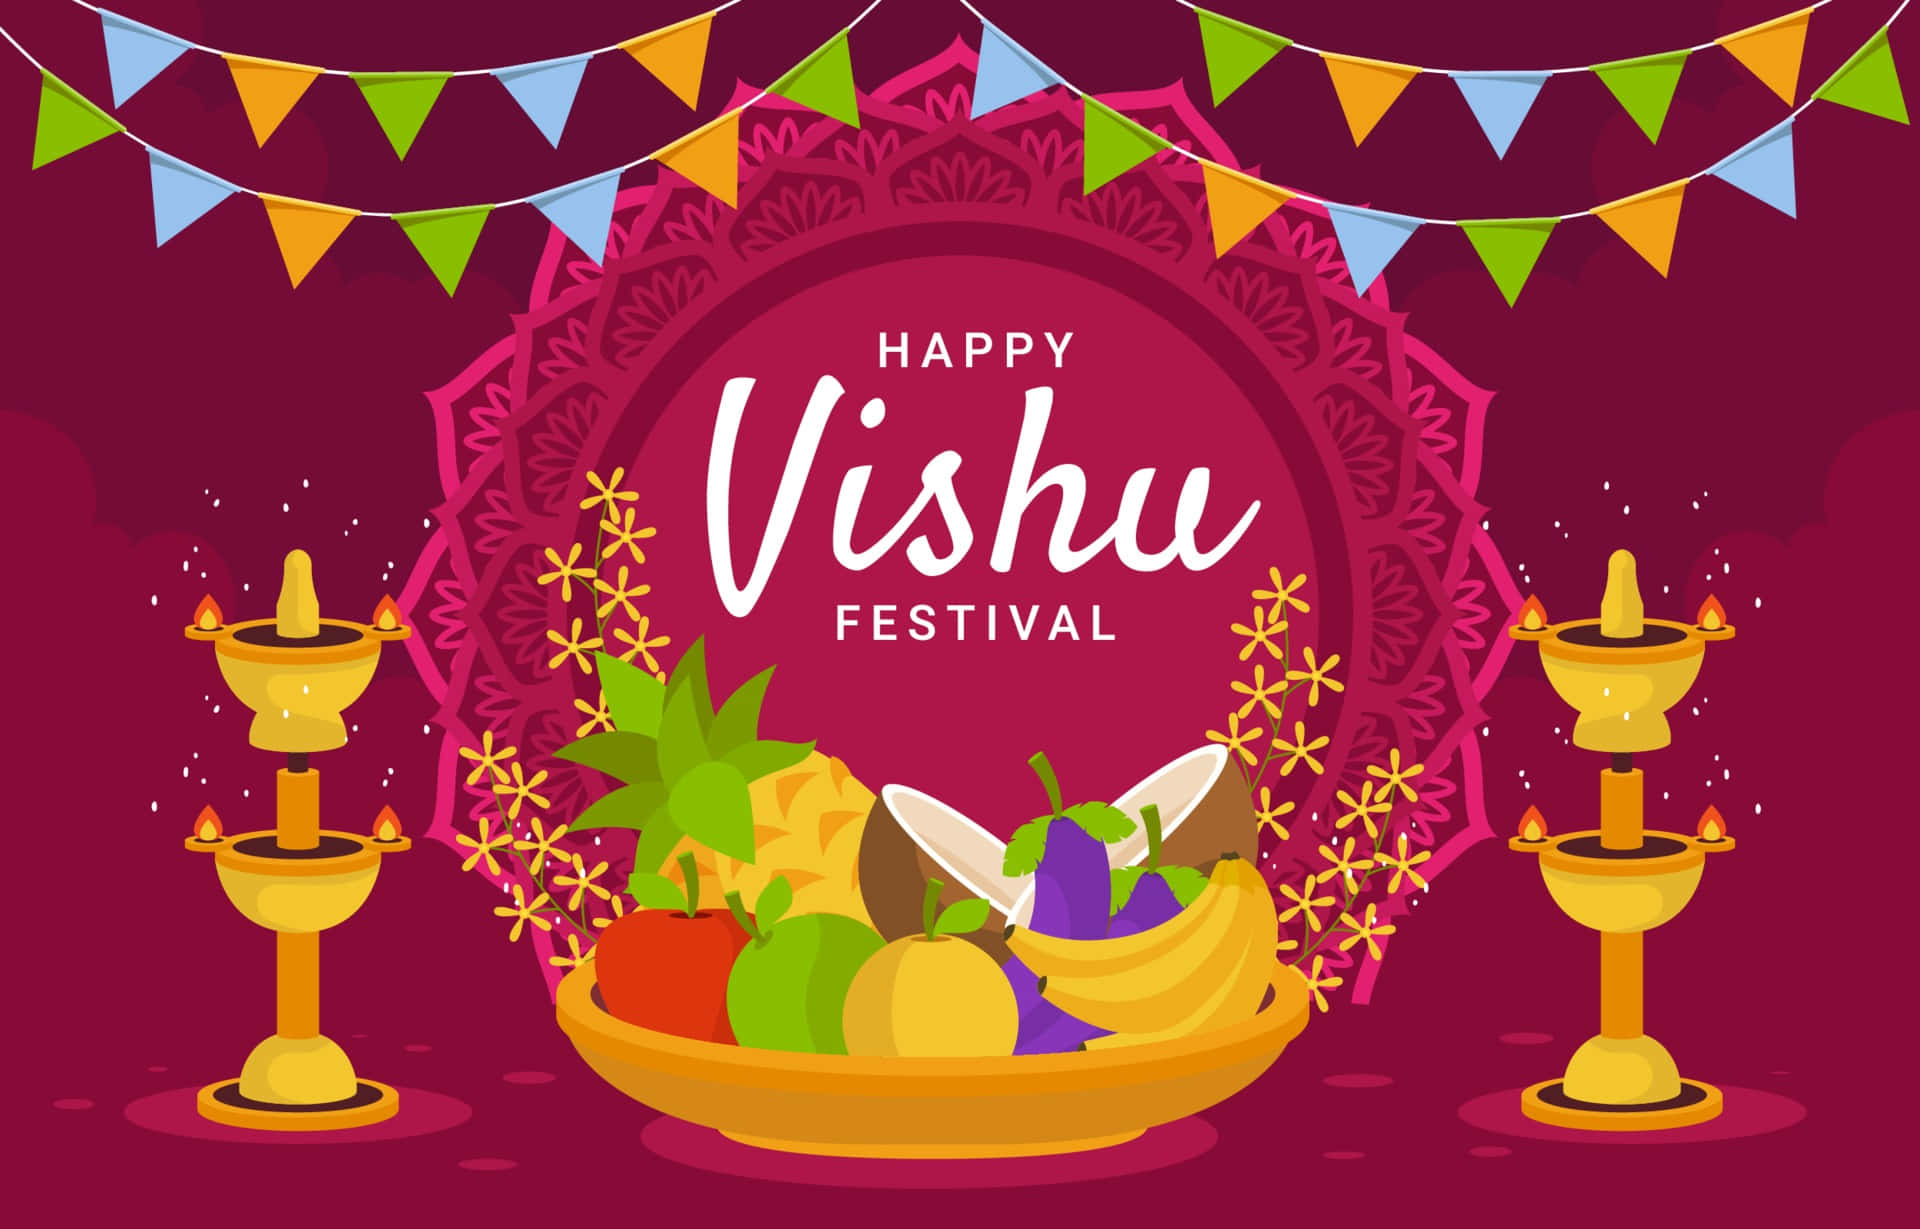 Happy Vishu Celebration with Vibrant Arrangement of Fruits, Flowers, and Gold Coins